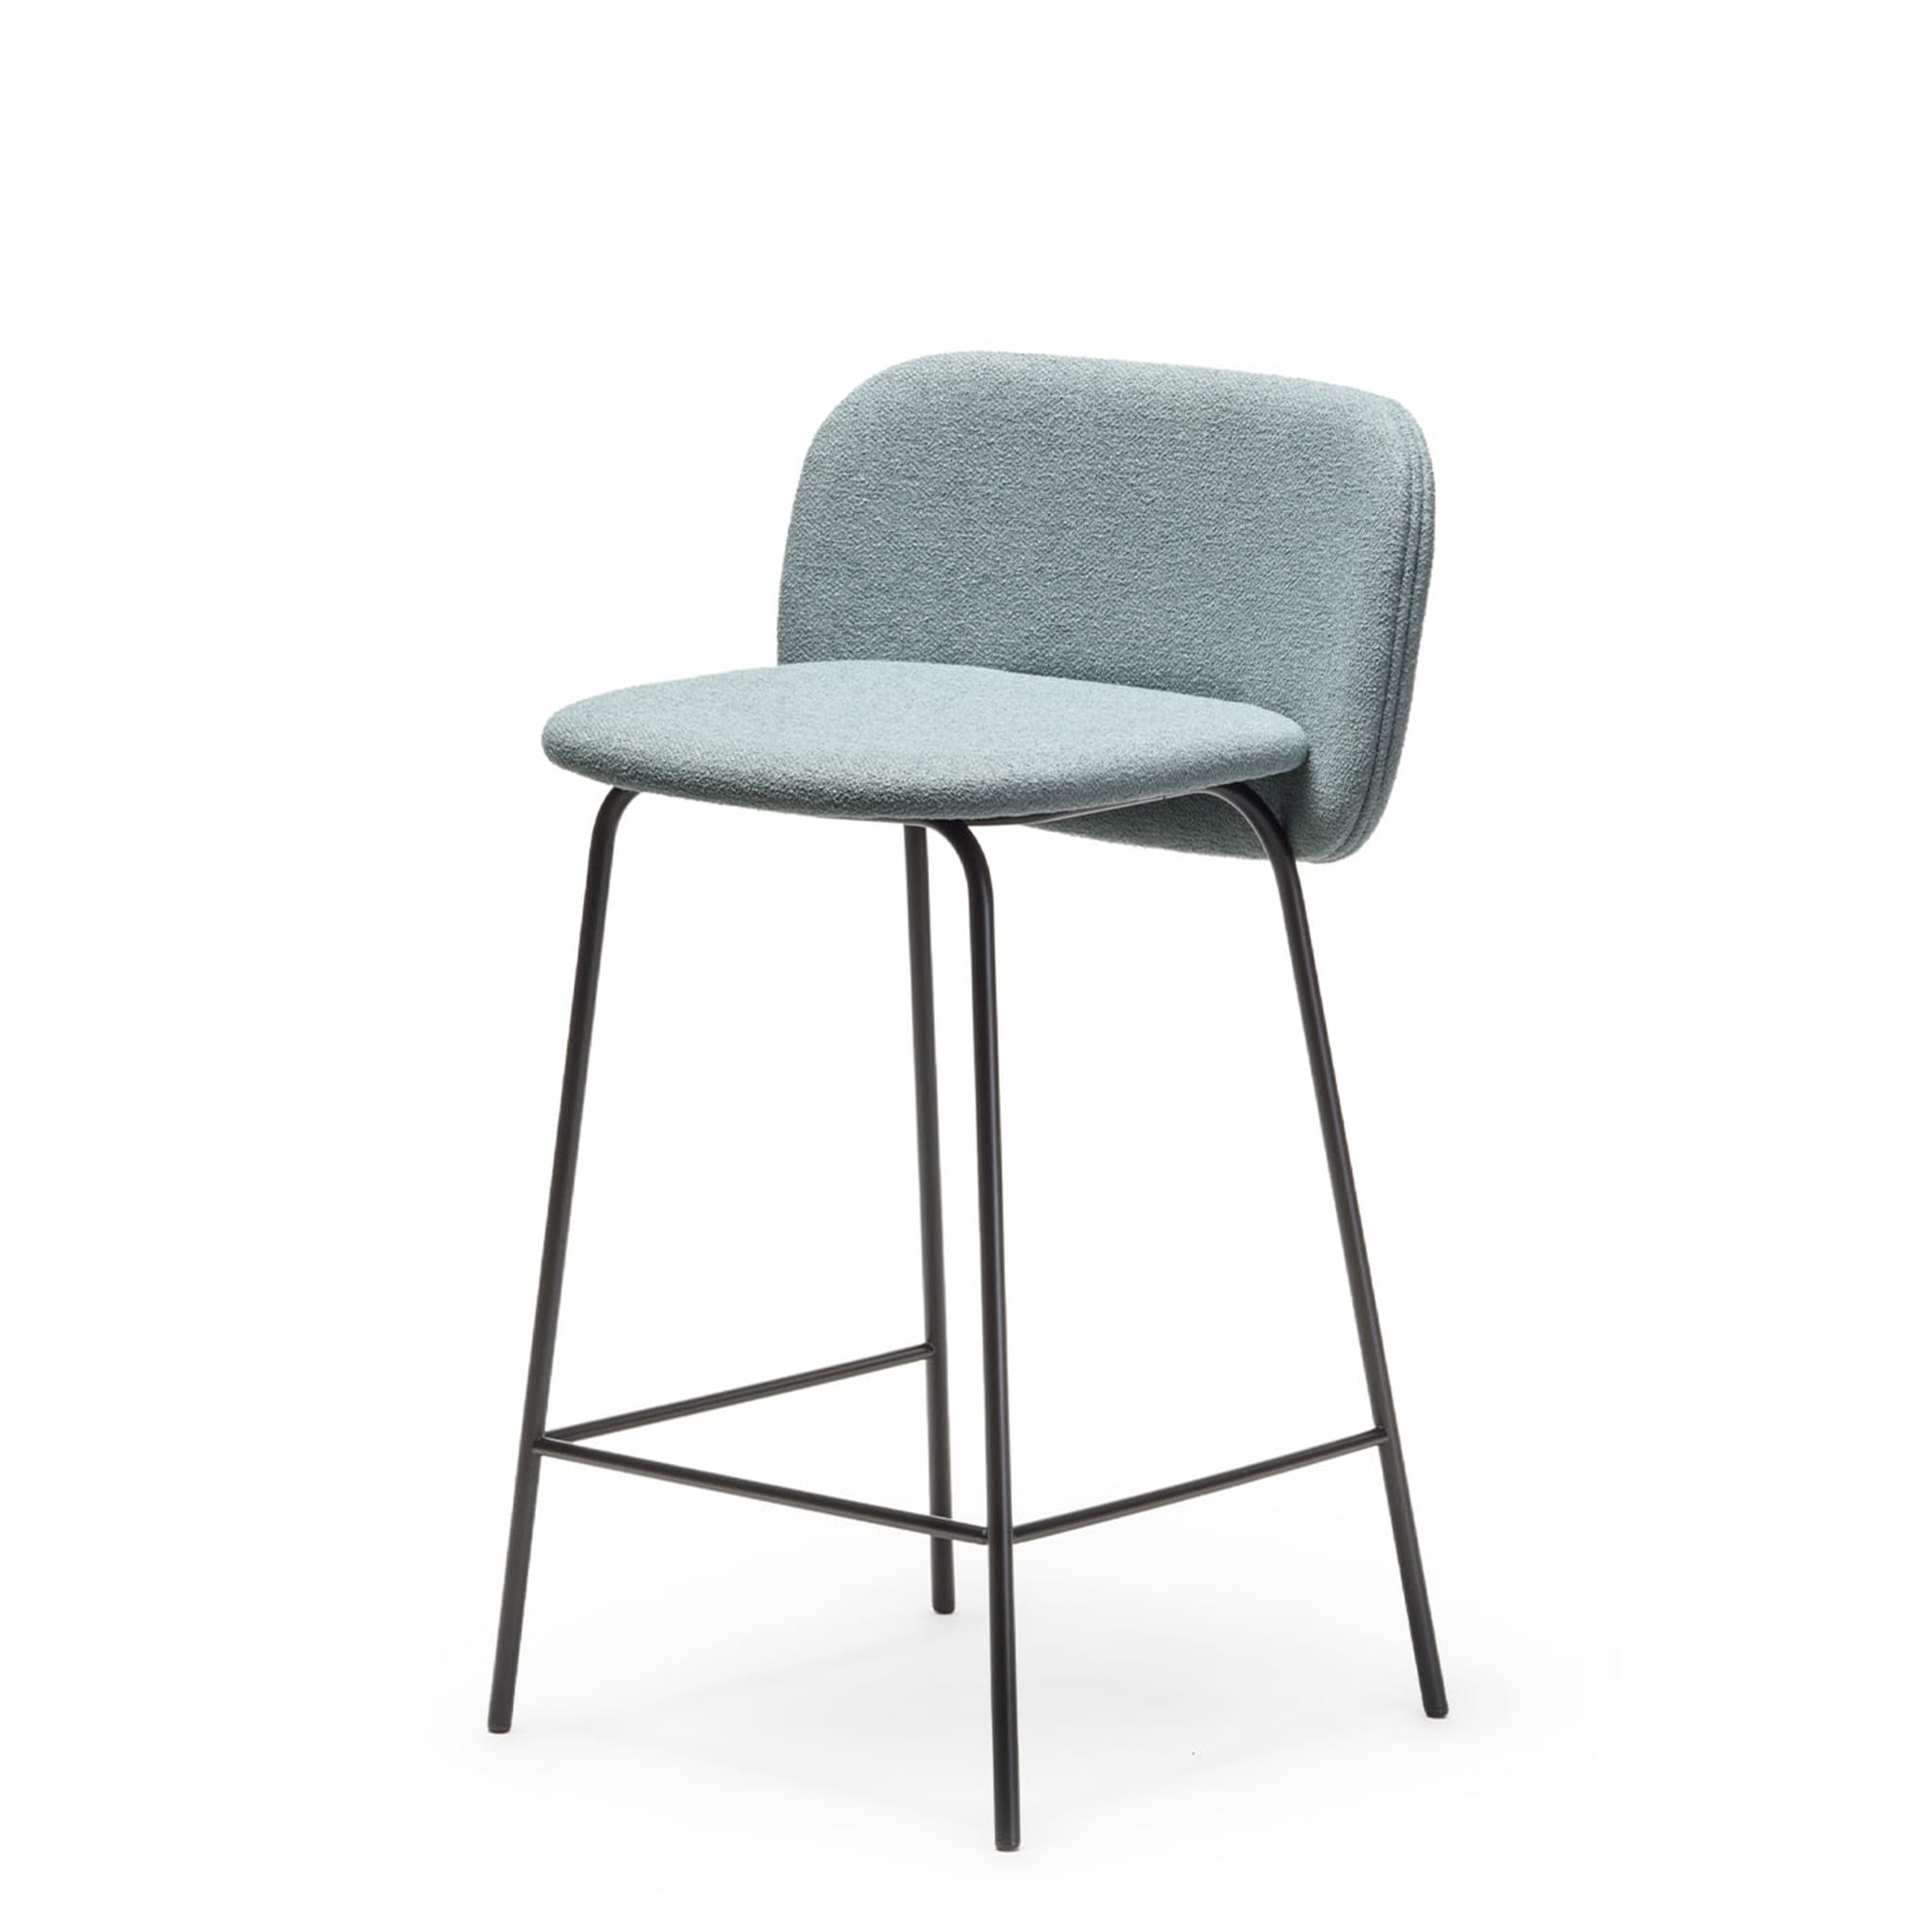 Chips M-Sg-65 Light Blue Counter Stool By Studio Pastina - Alternative view 1